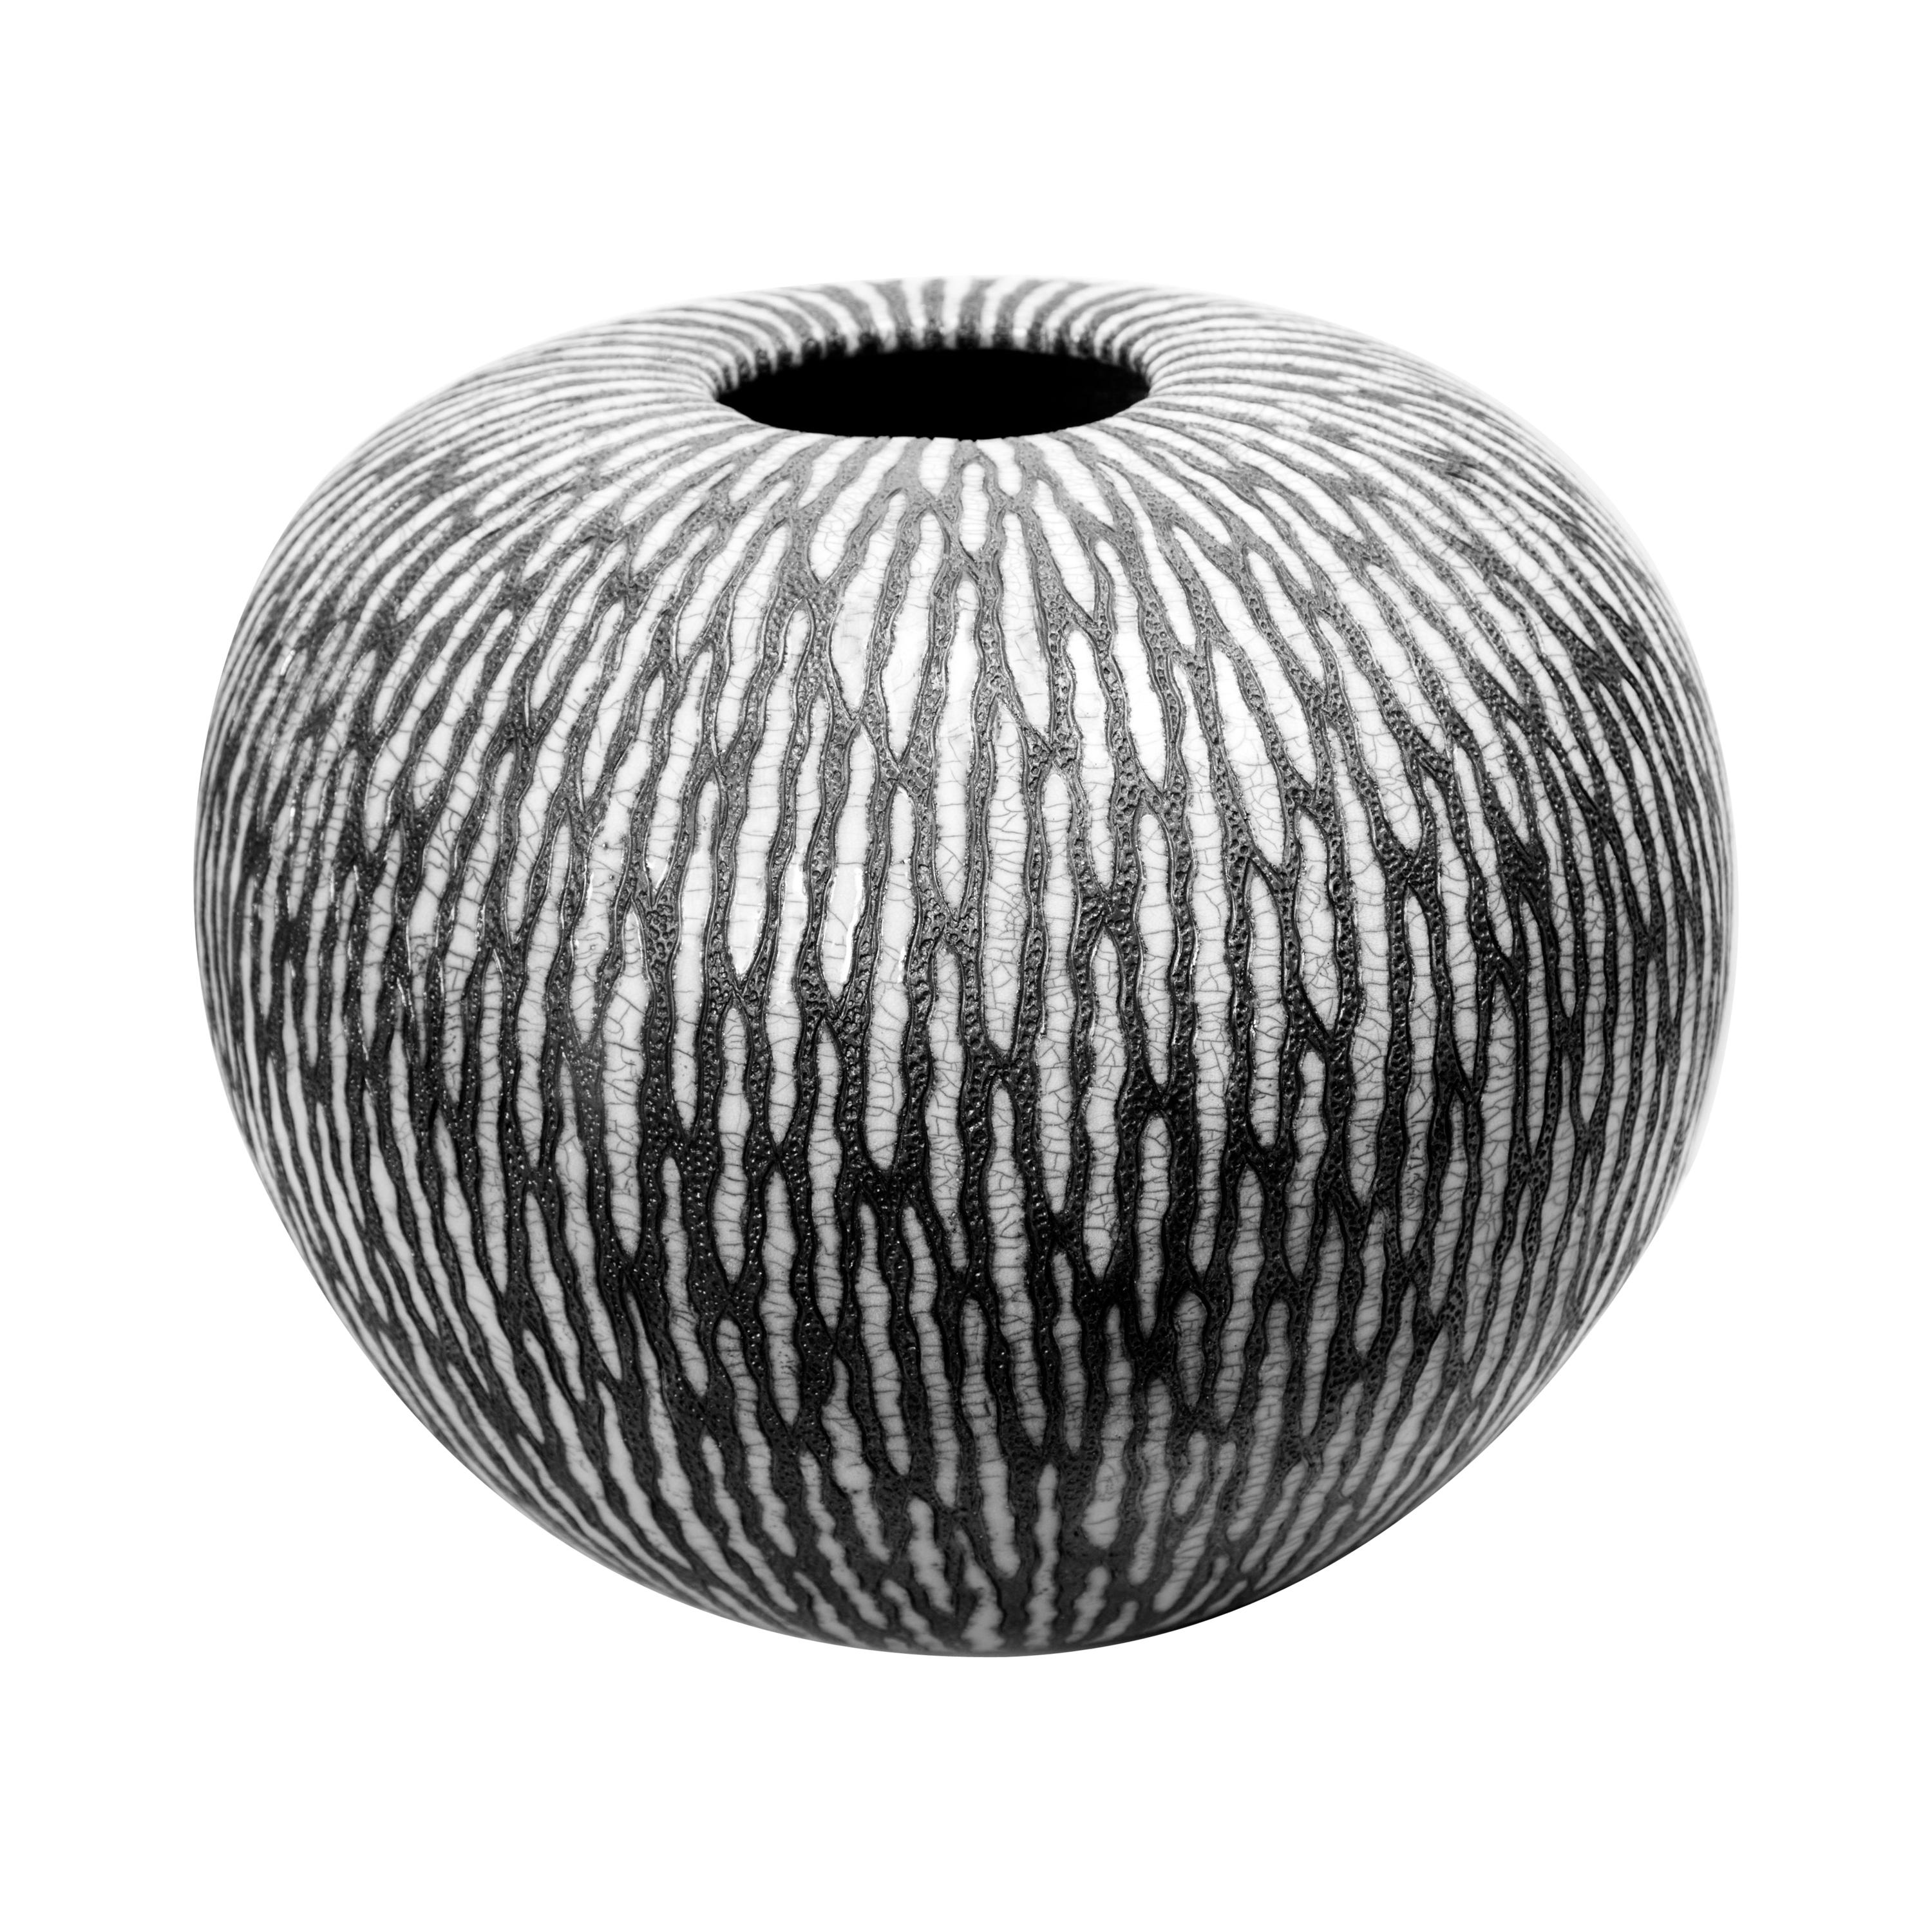 Contemporary Black and White Ceramic Globe Vase, Boule Strate, Large For Sale